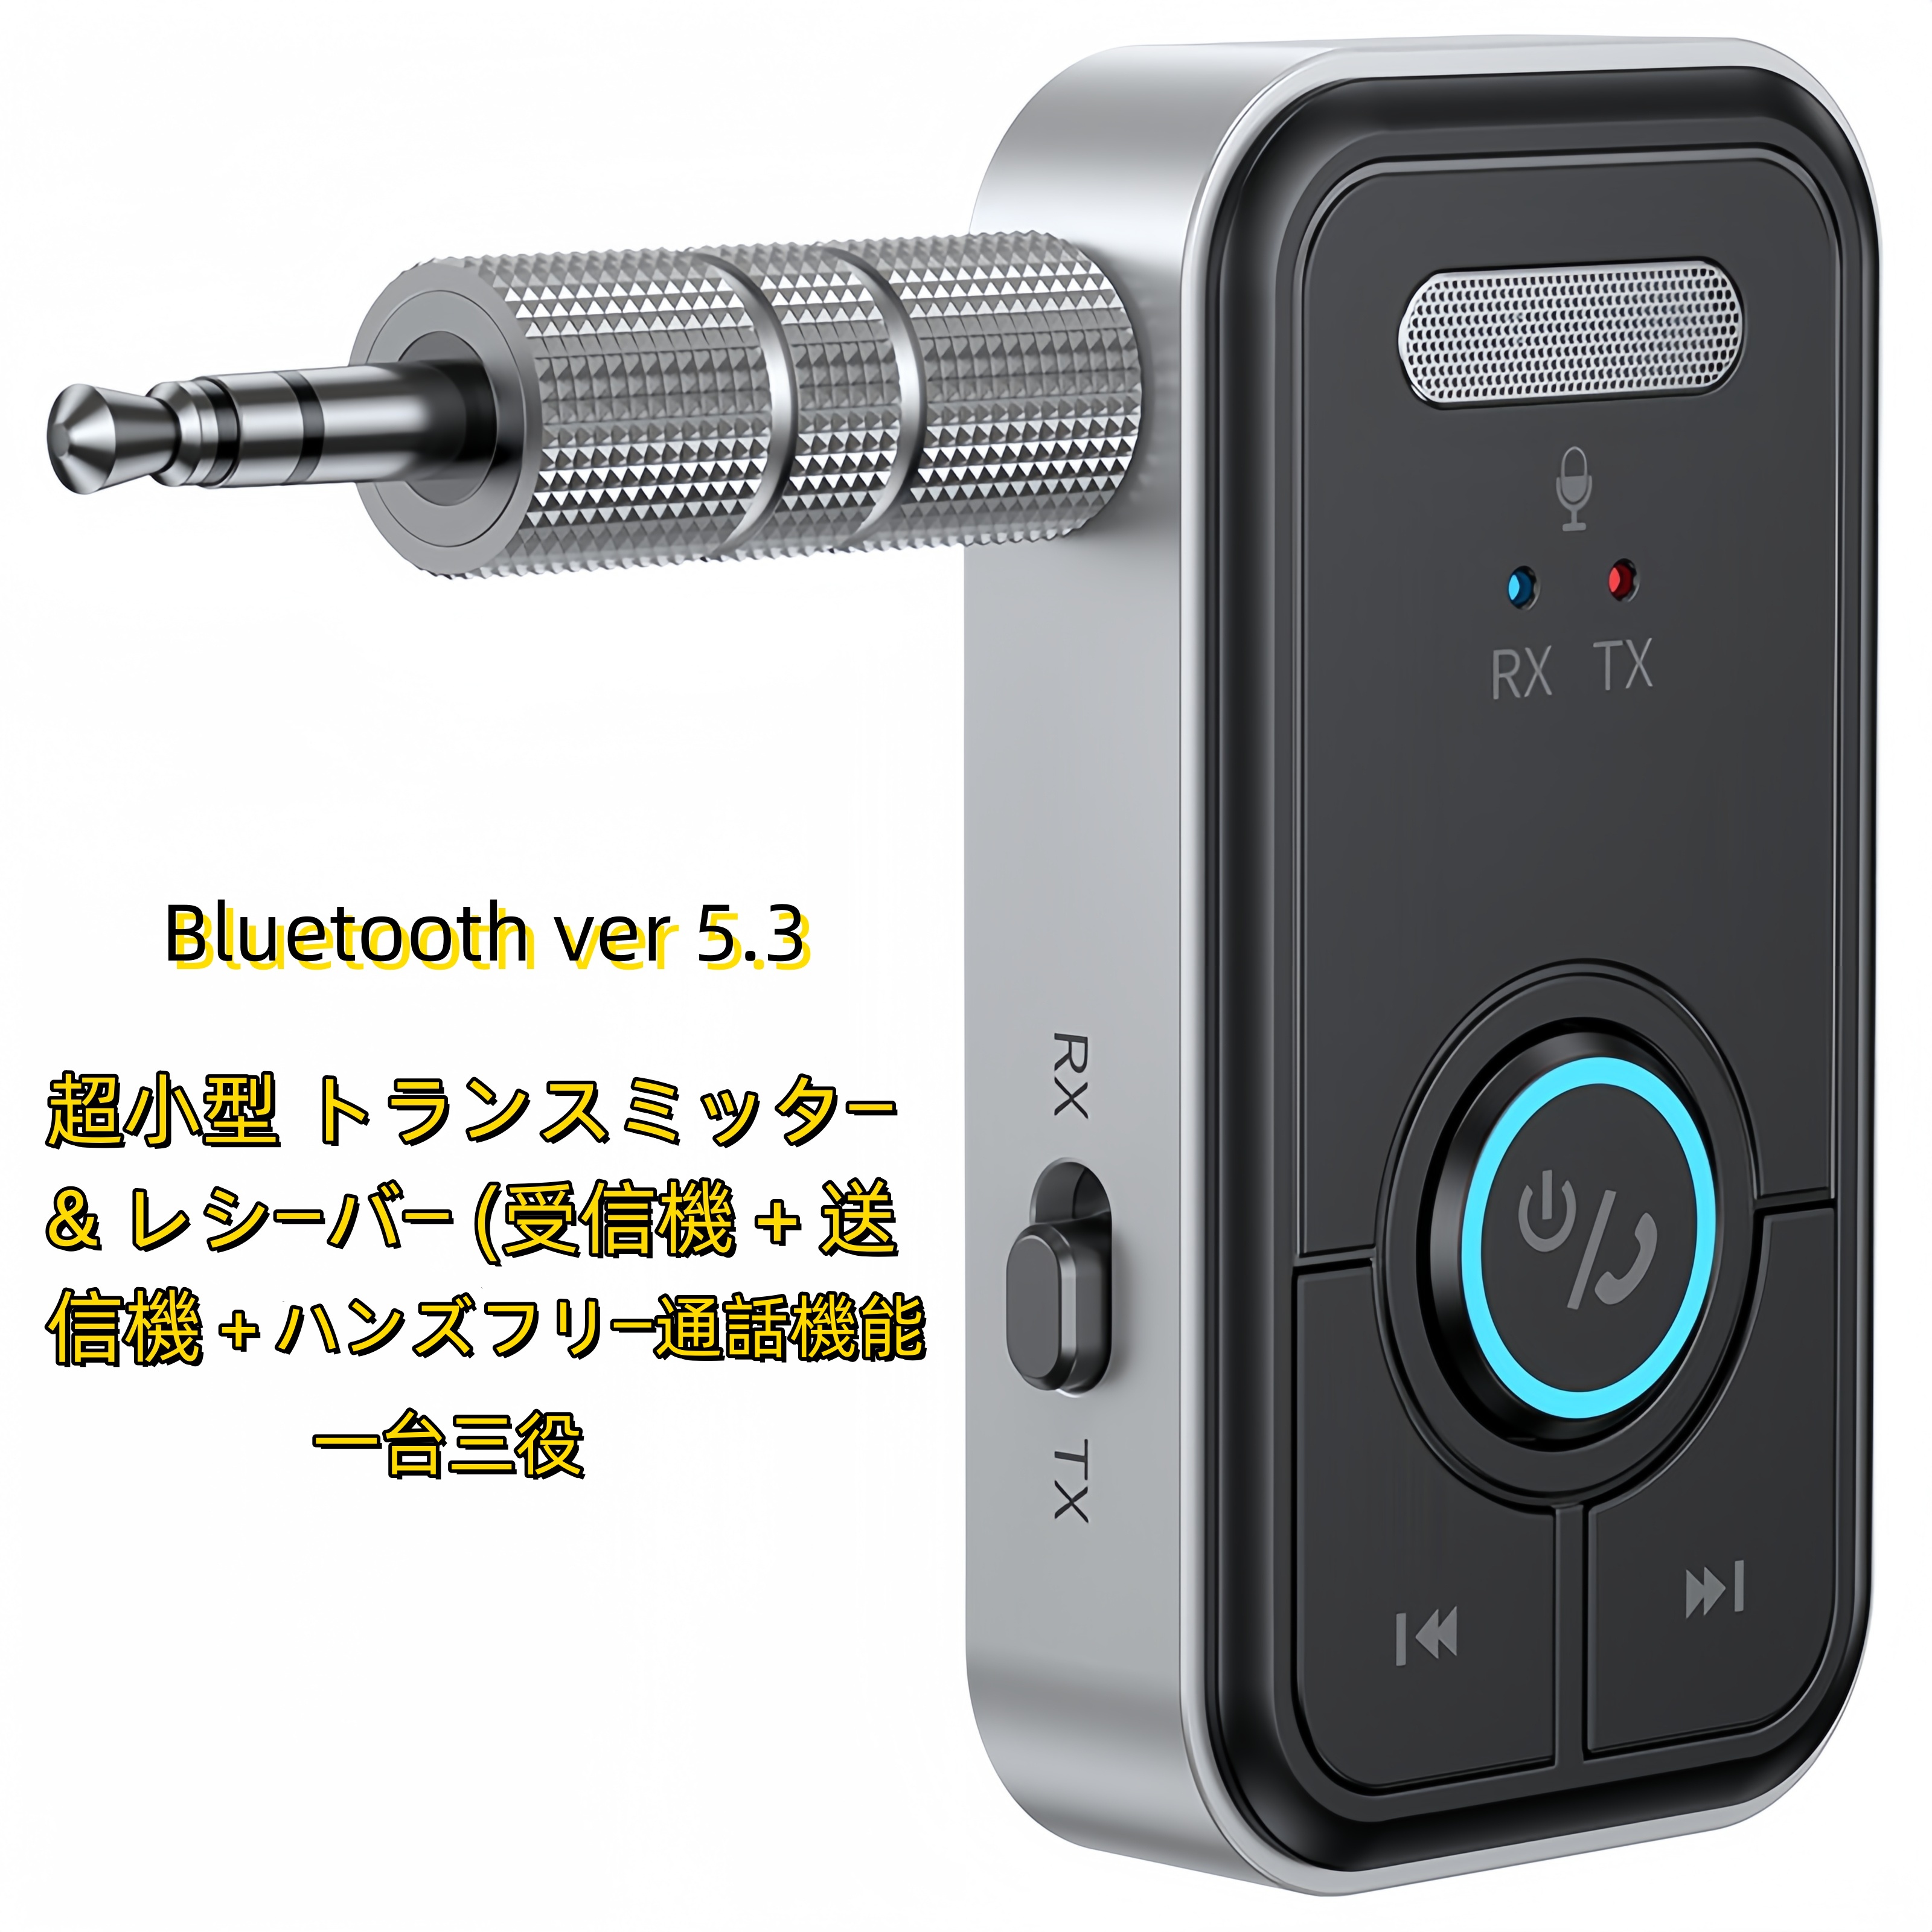 Bluetooth5.3 microminiature transmitter hands free telephone call receiver receiver transmitter one pcs three position sending reception both correspondence TV tv iphone android